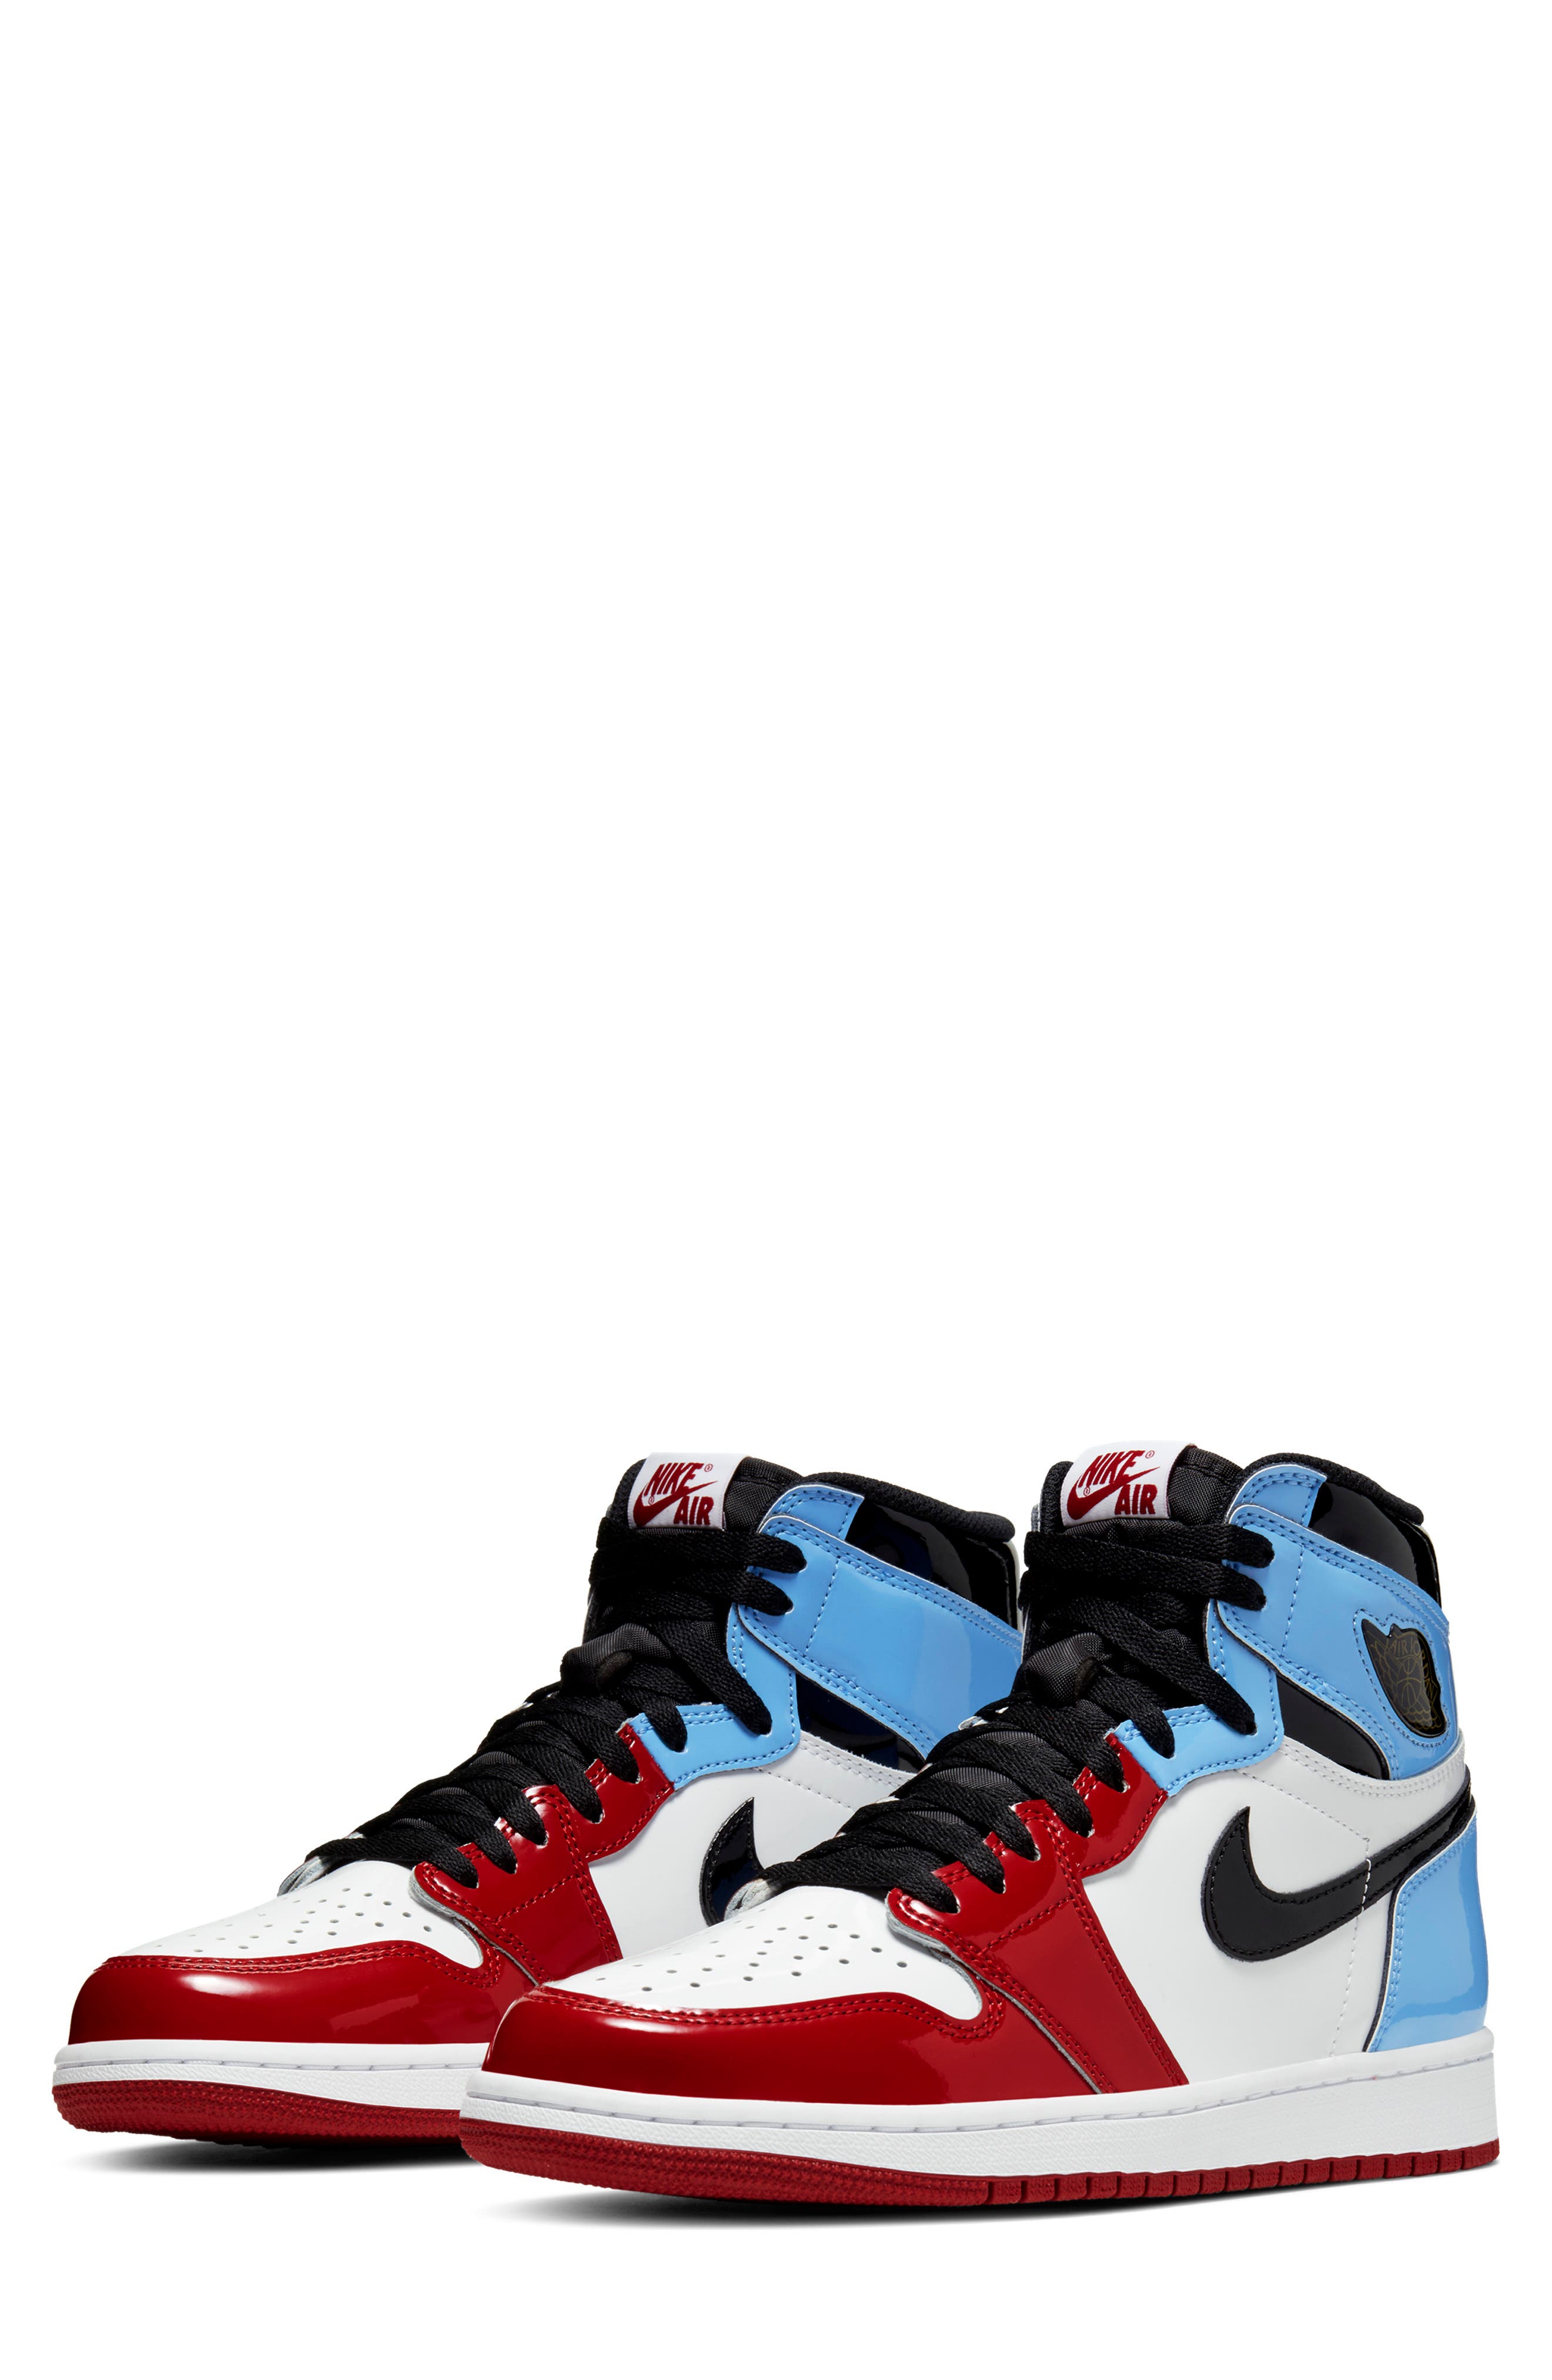 red and blue nike high tops